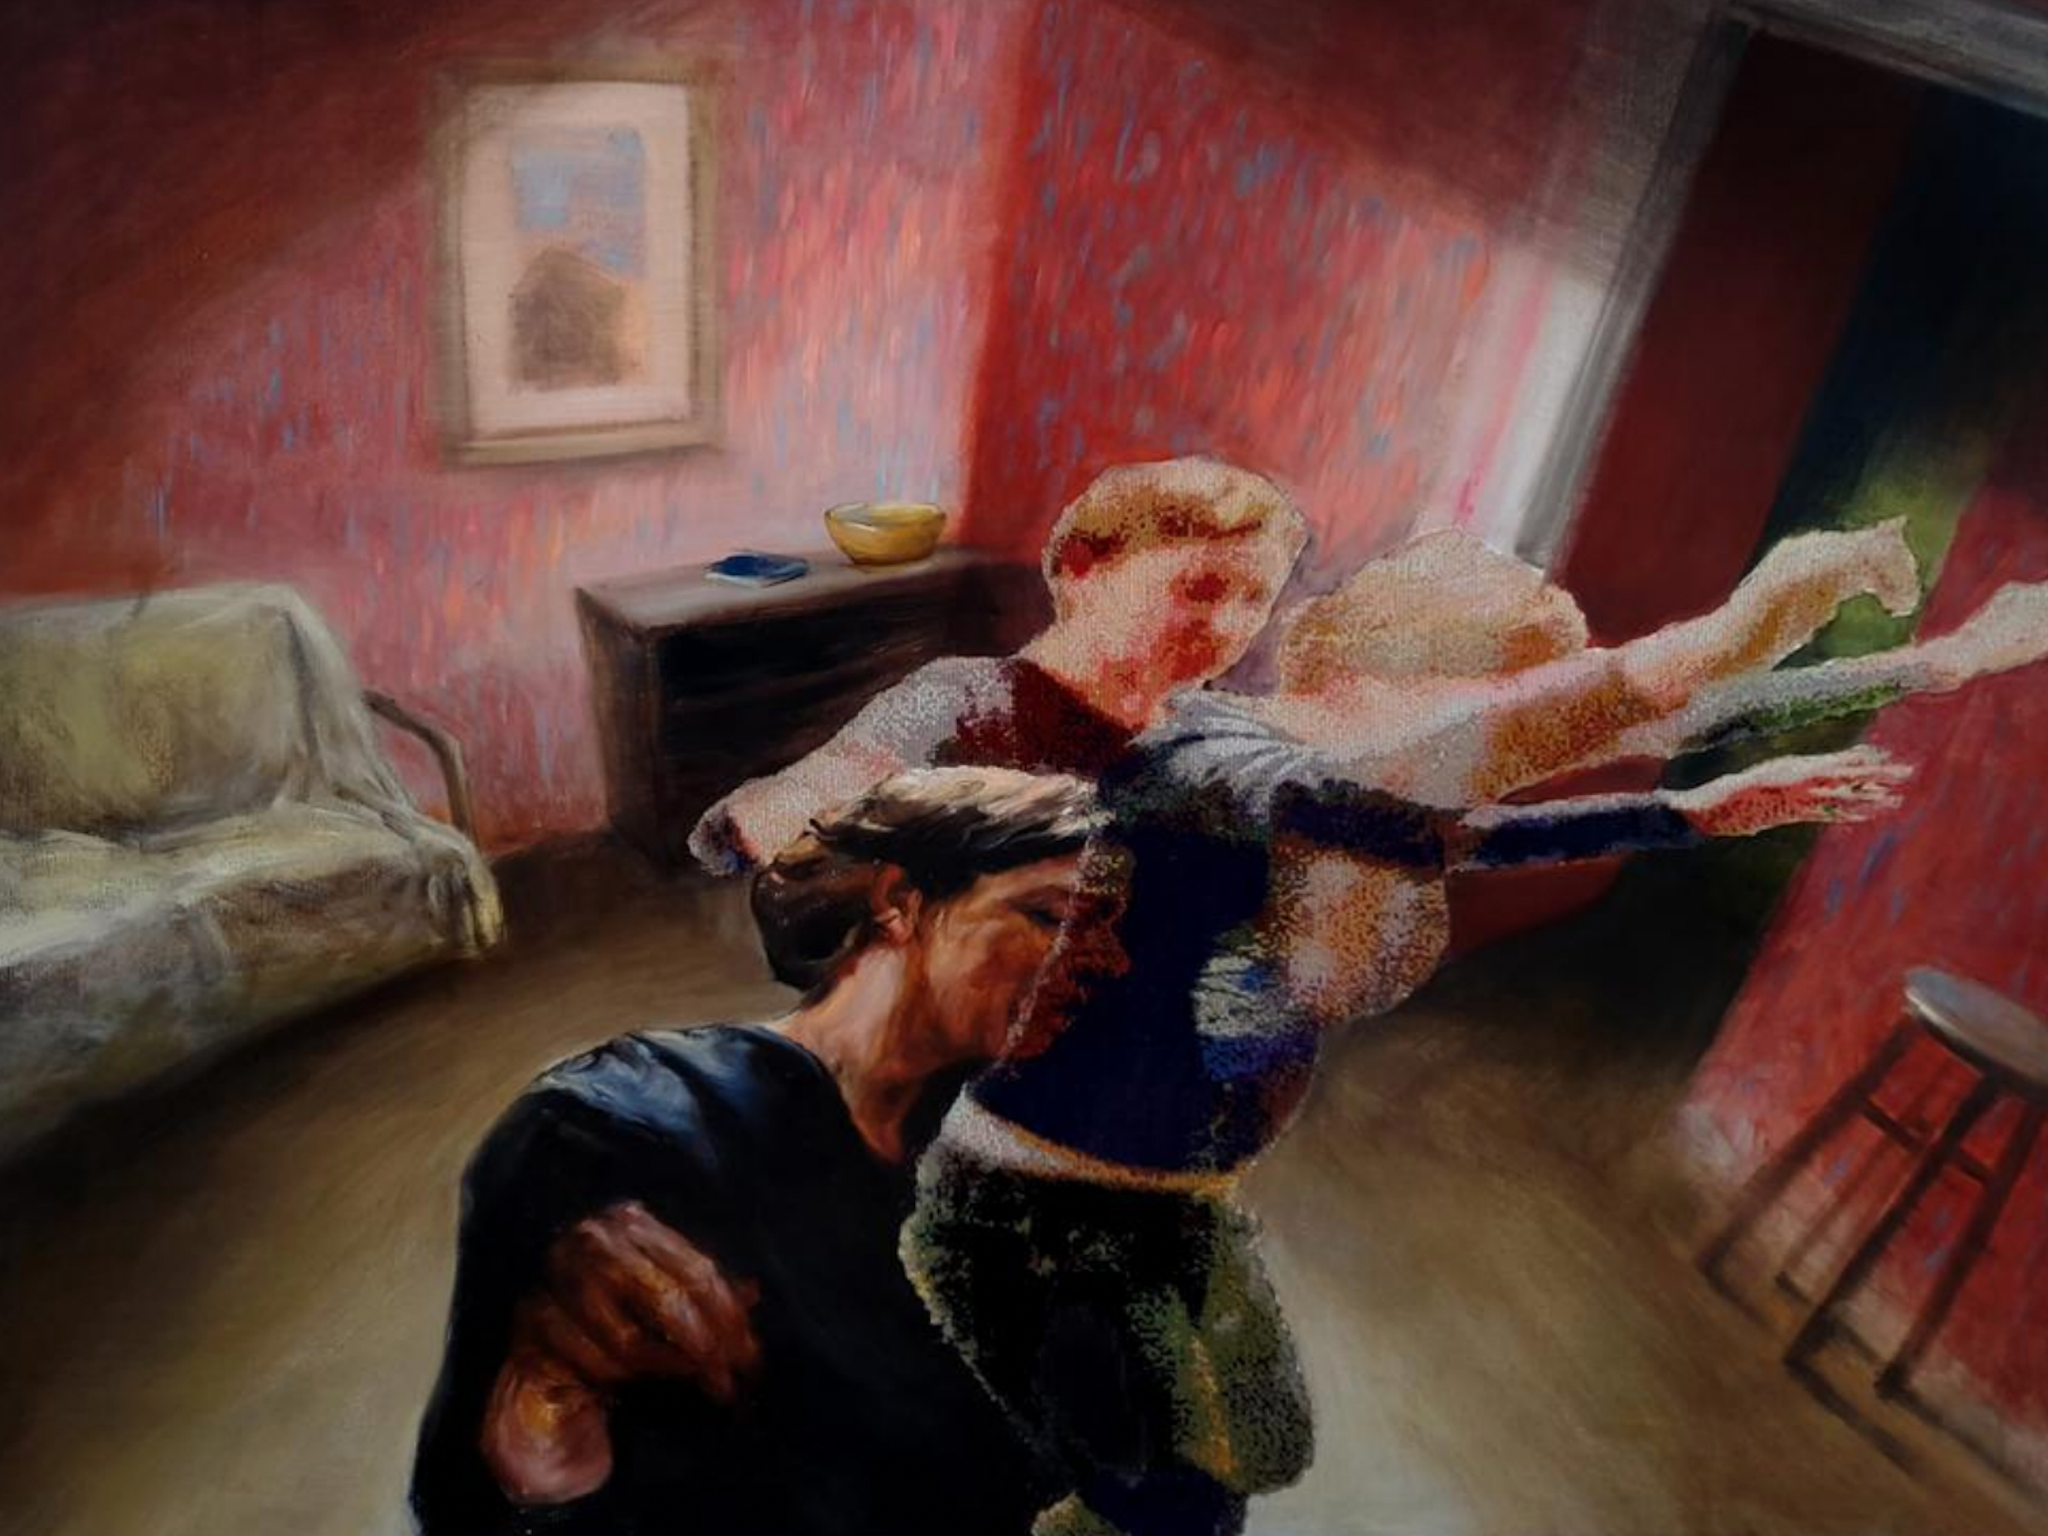 ‘Dancing in the red room’ by Olesia Trofimenko (2022)